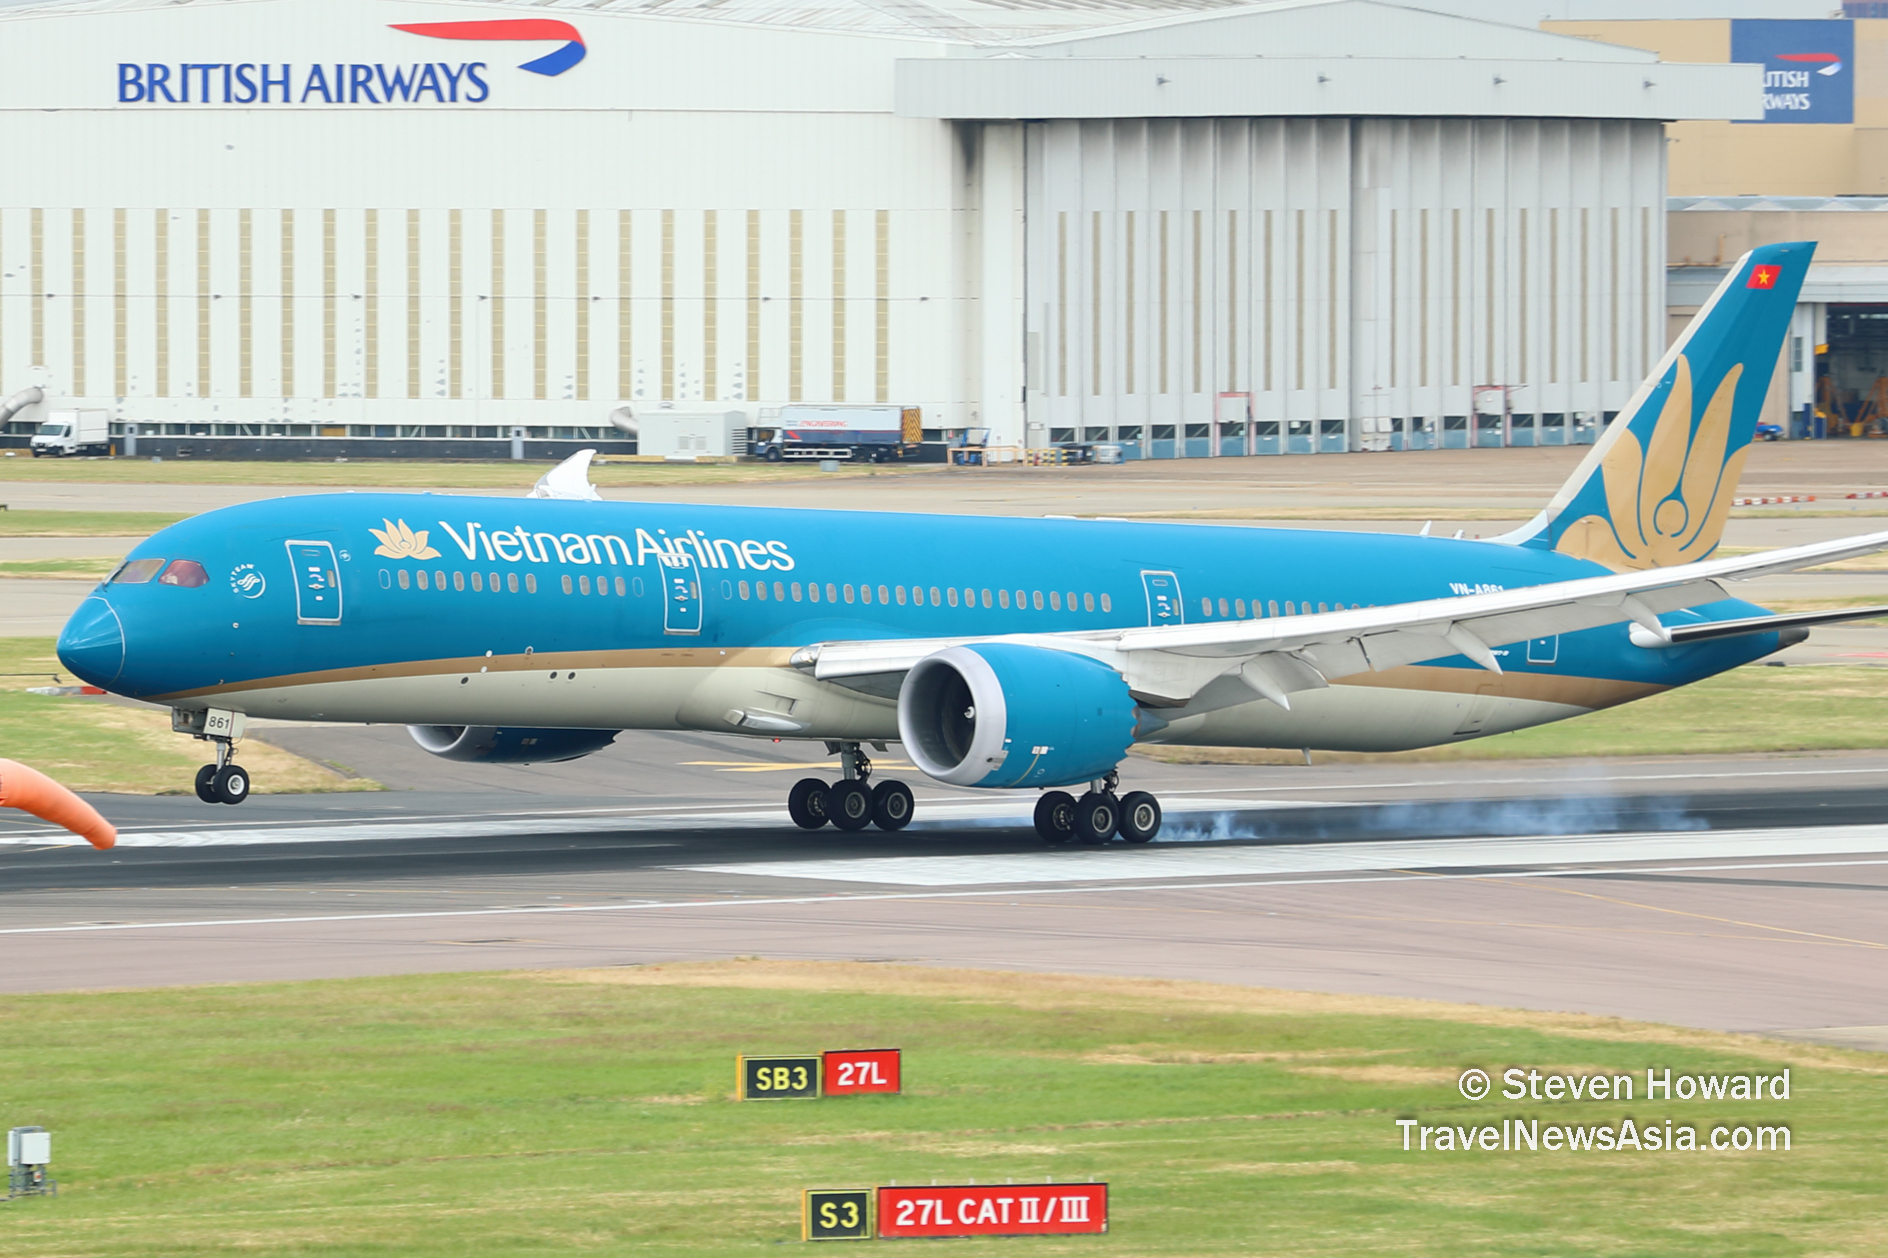 Vietnam Airlines B787-9 reg: VNA861 at LHR in June 2023. Picture by Steven Howard of TravelNewsAsia.com Click to enlarge.